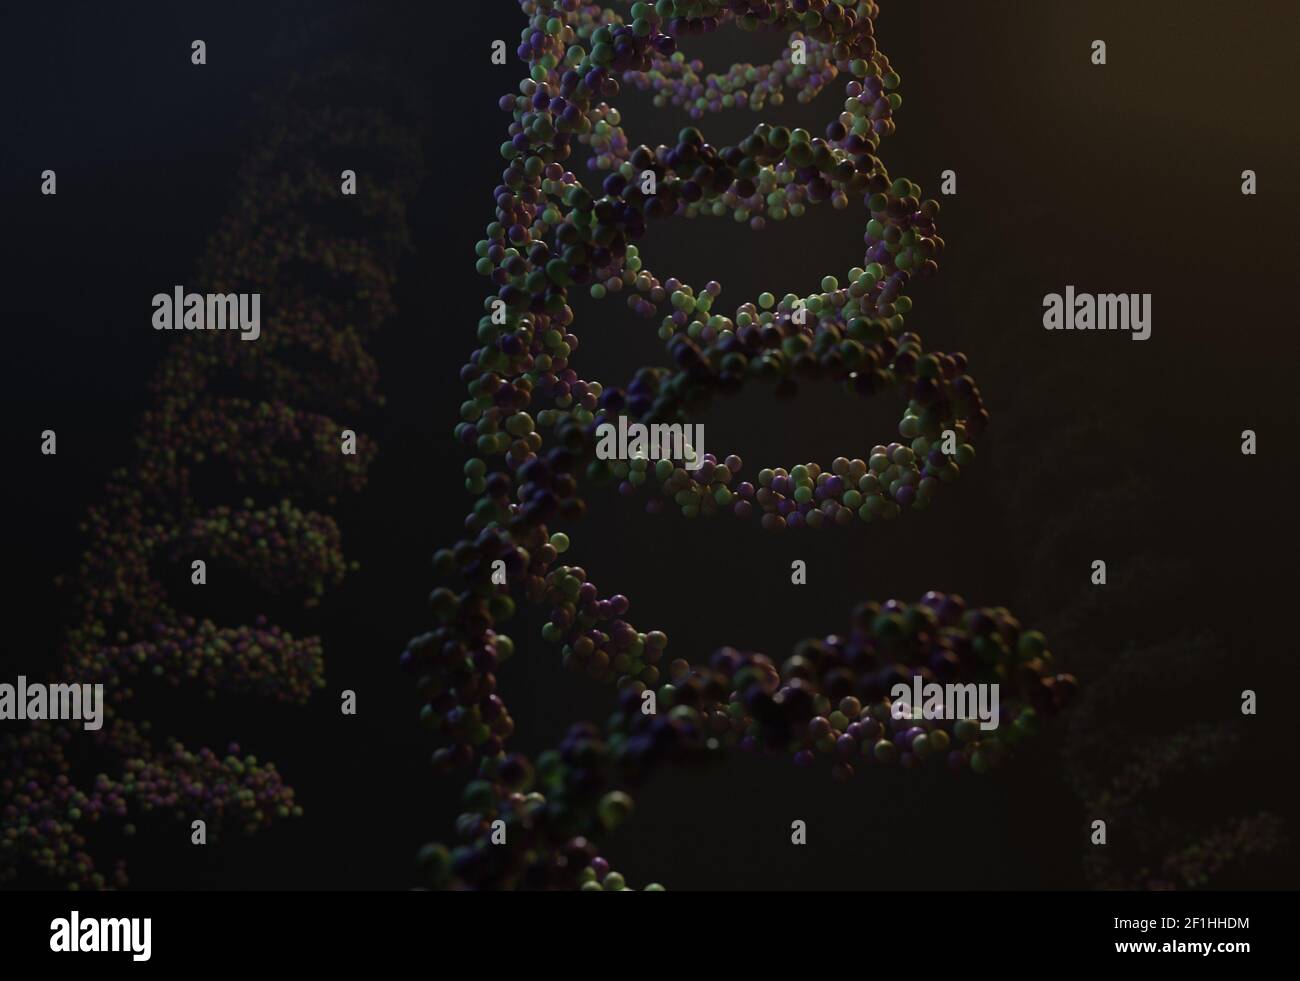 Sequenced pattern of DNA molecule atoms in threads 3d illustration Stock Photo